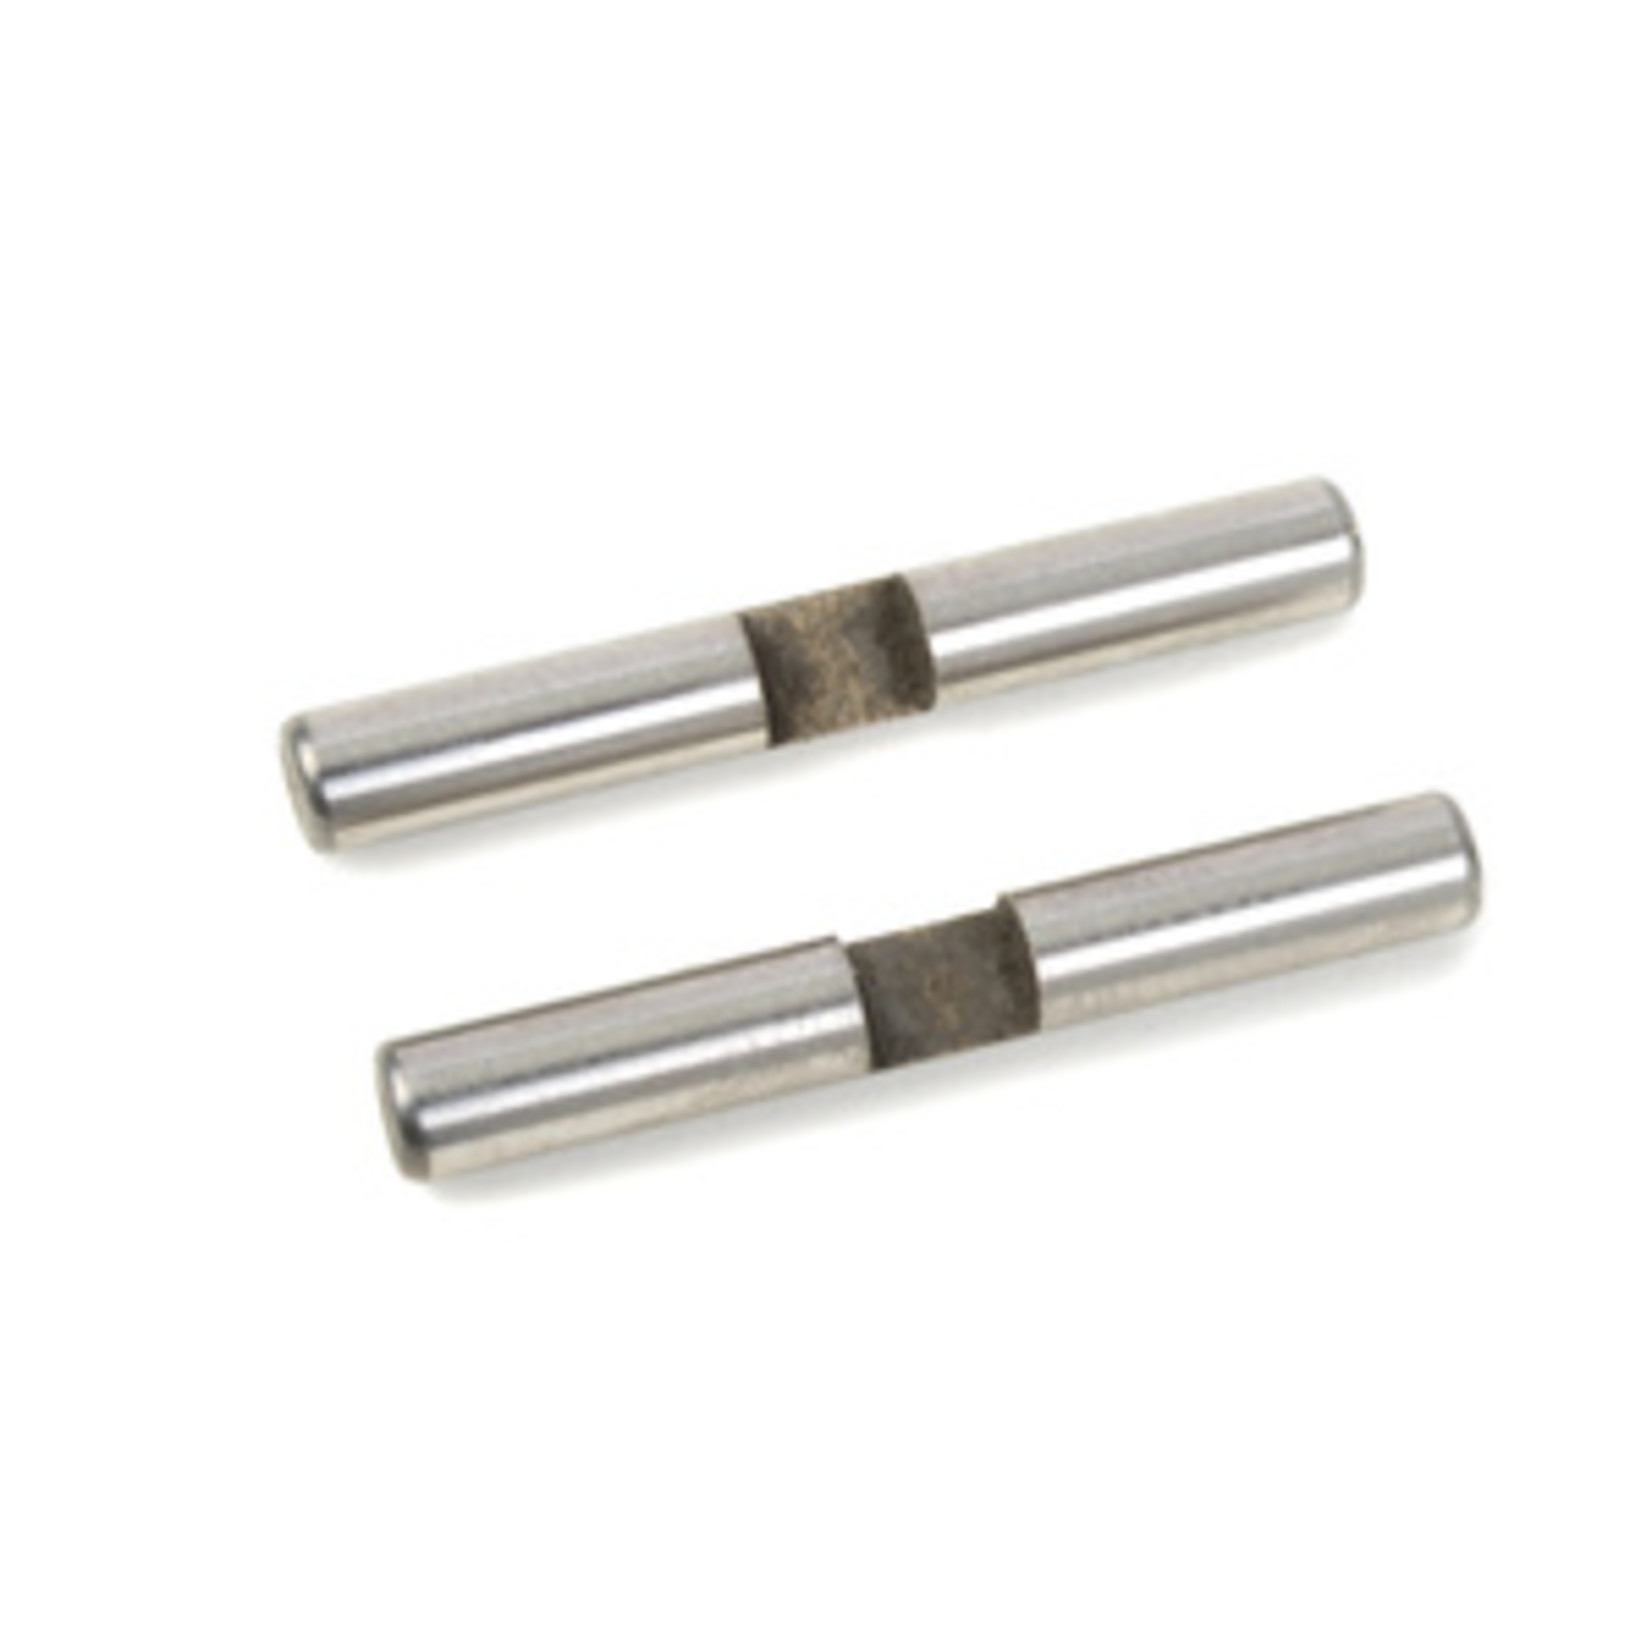 Corally (Team Corally) C-00180-184  Gear Differential Pin - Steel - 2 pcs: Dementor, Kronos,